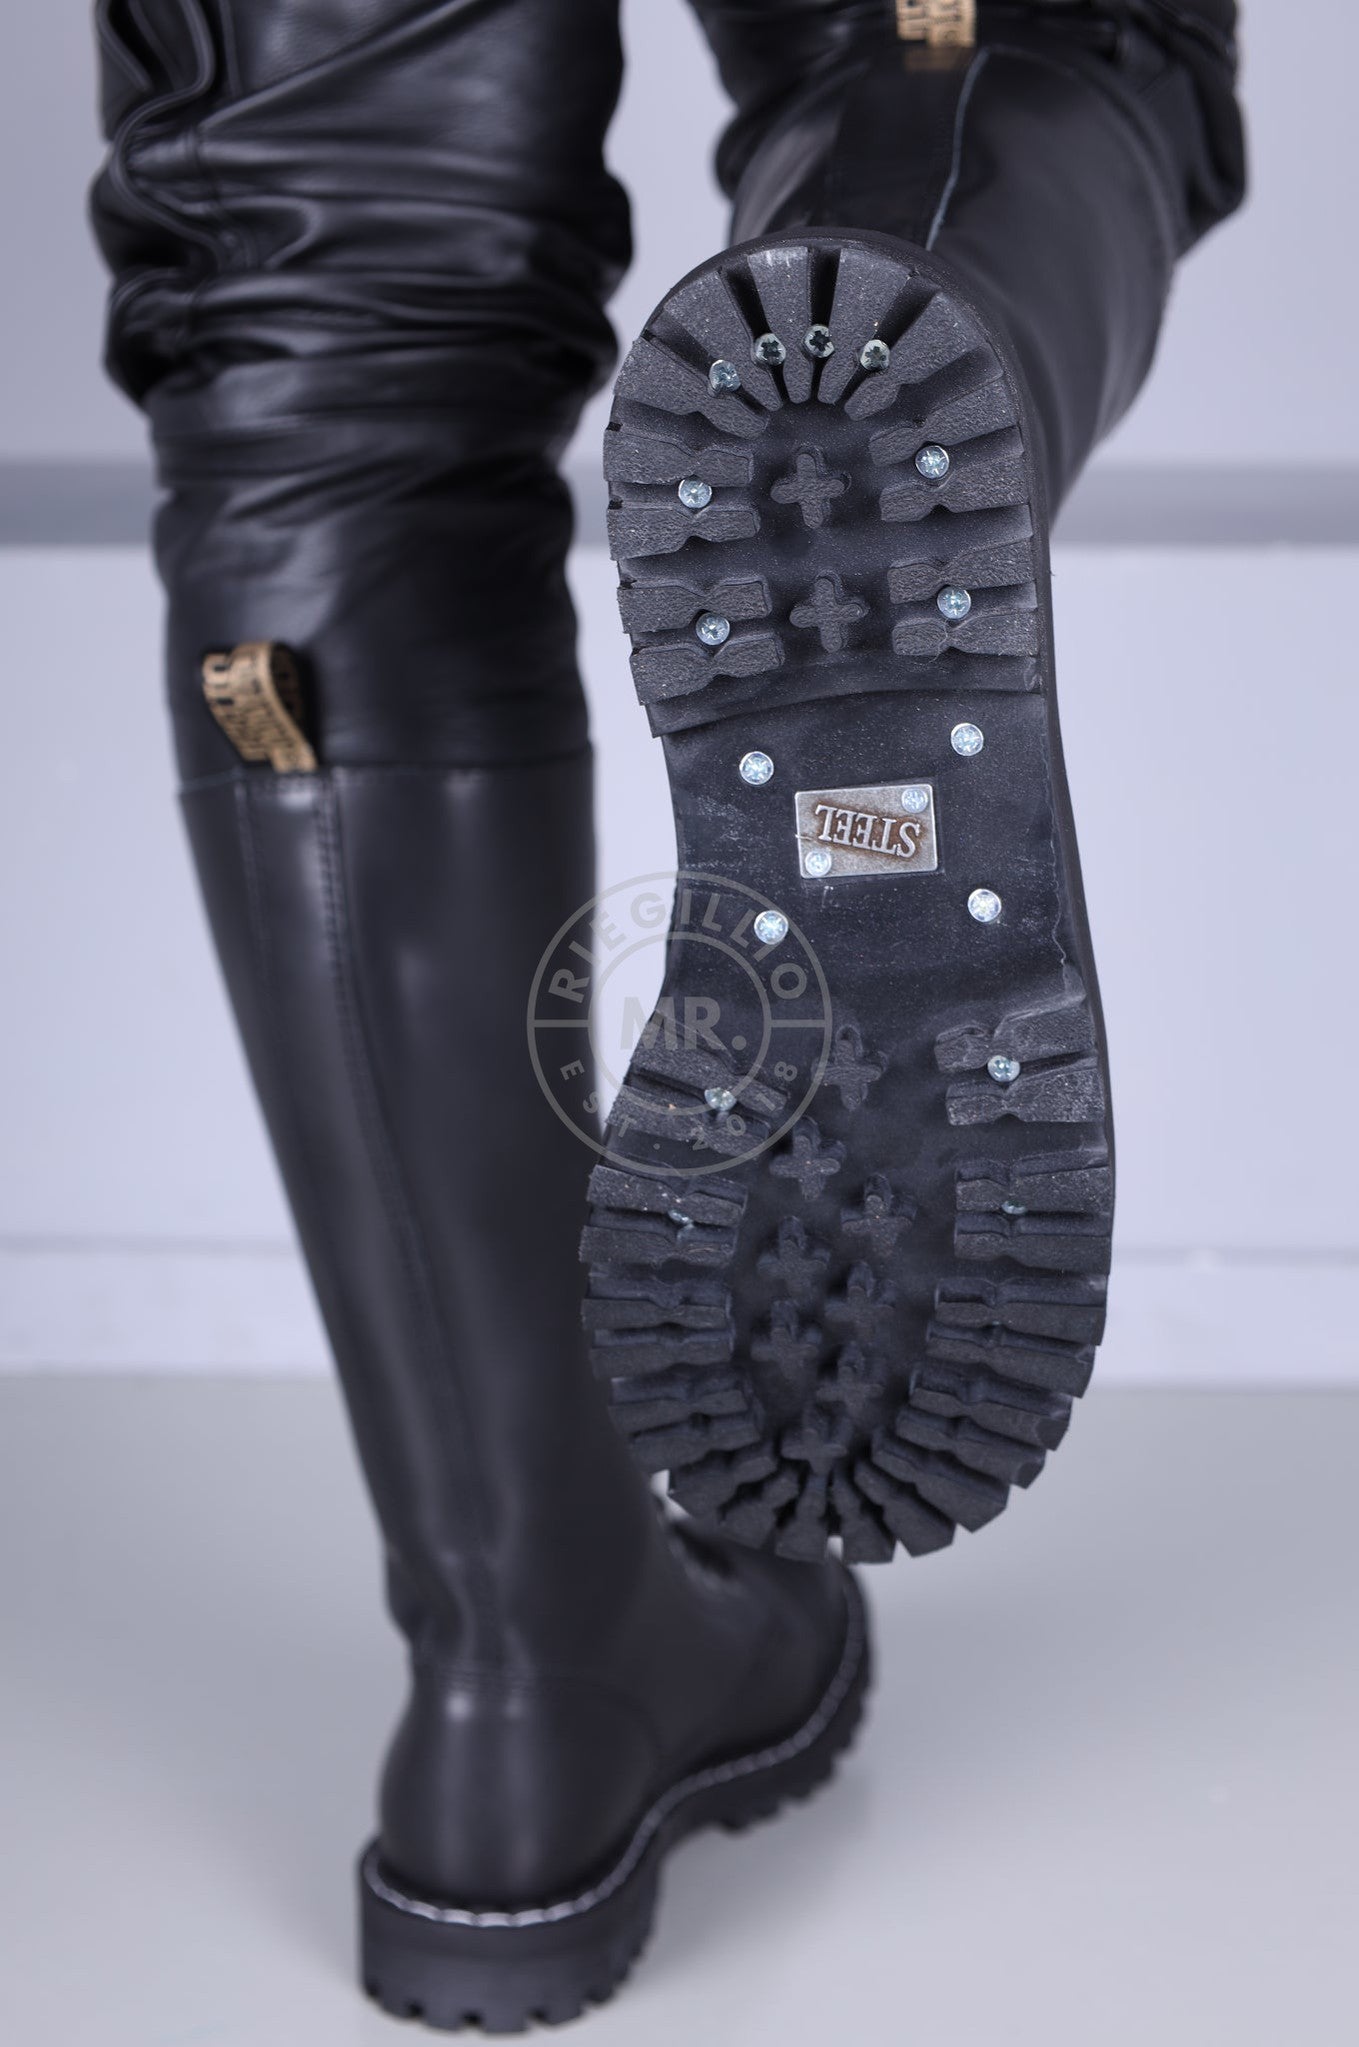 Would you like this home - boots.leather.latex.pvc